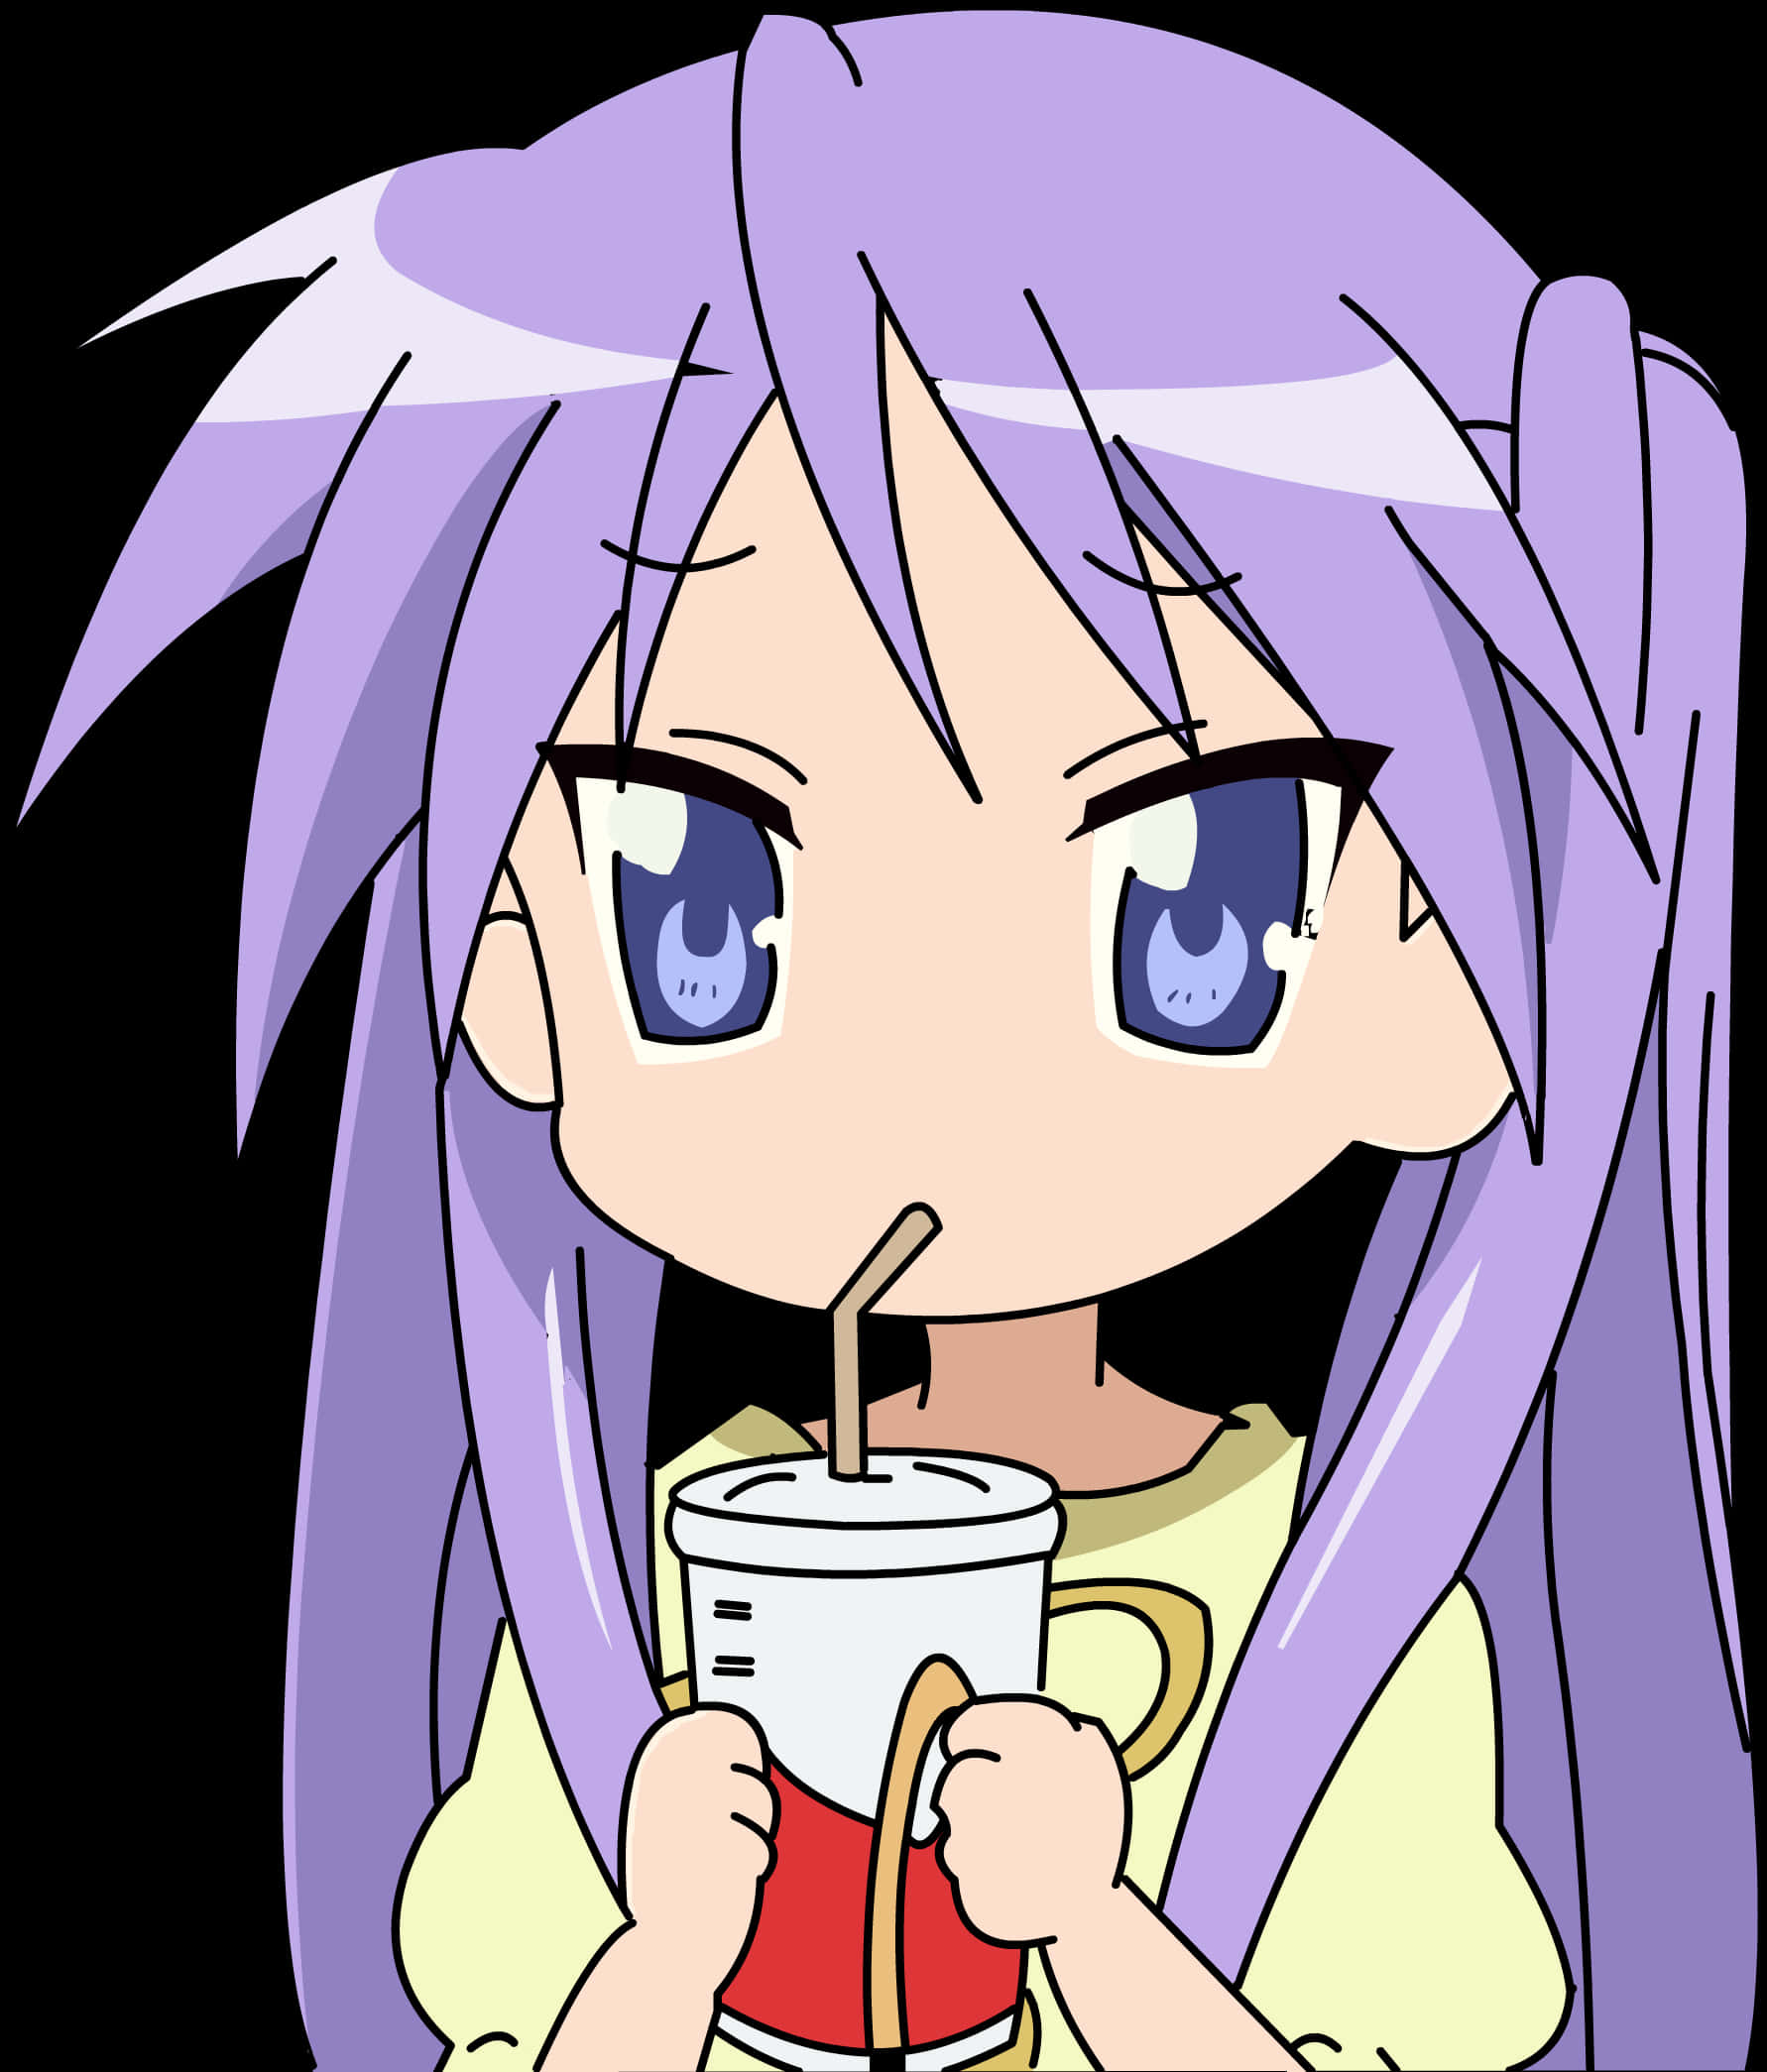 A Cartoon Of A Girl Drinking From A Straw